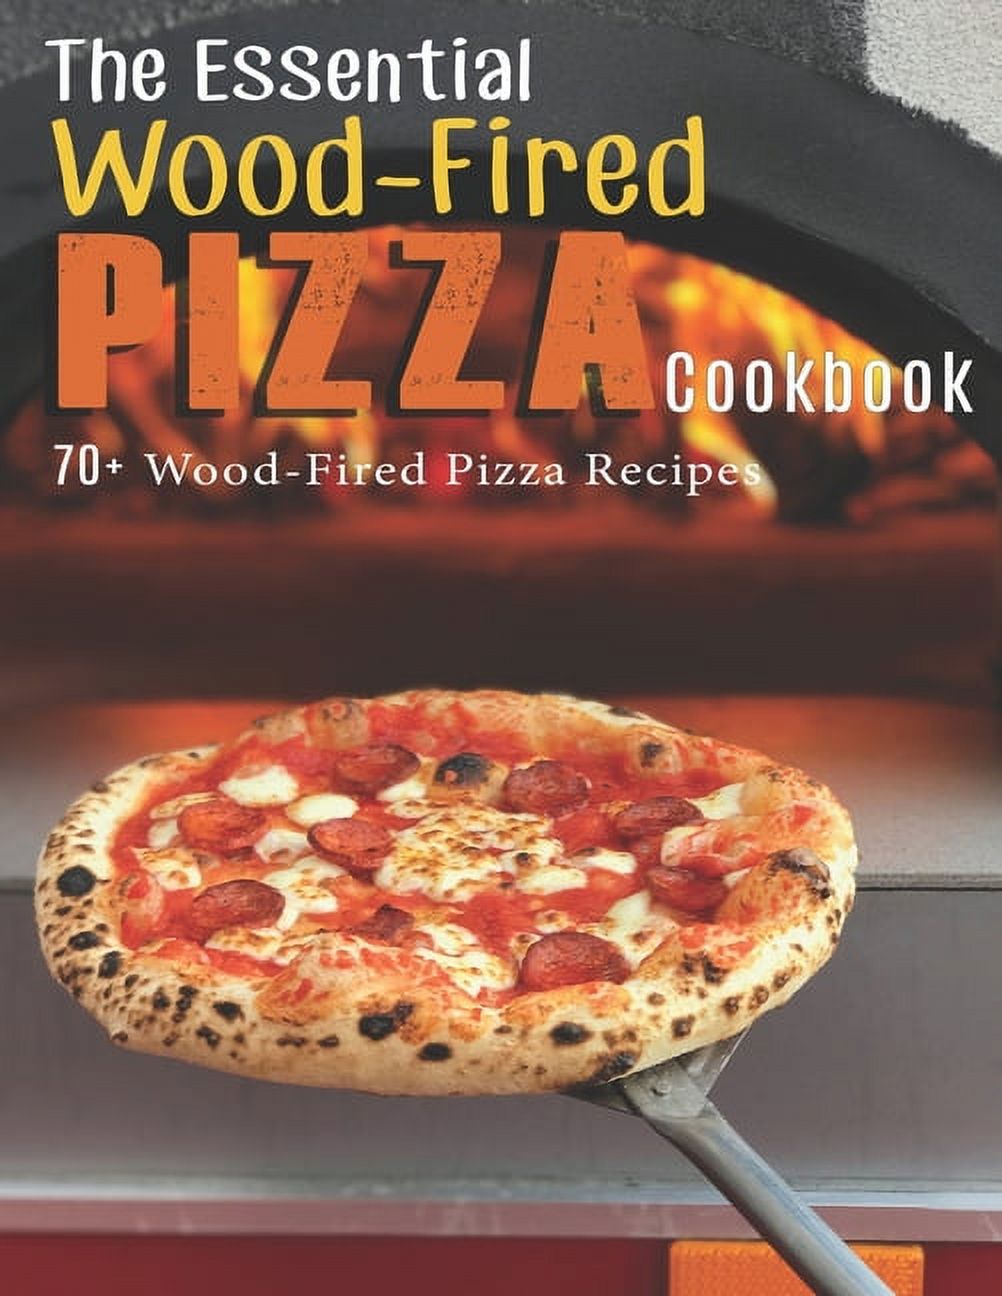 The Essential Wood-Fired Pizza Cookbook: 70+ Wood-Fired Pizza Recipes (Paperback) - image 1 of 1